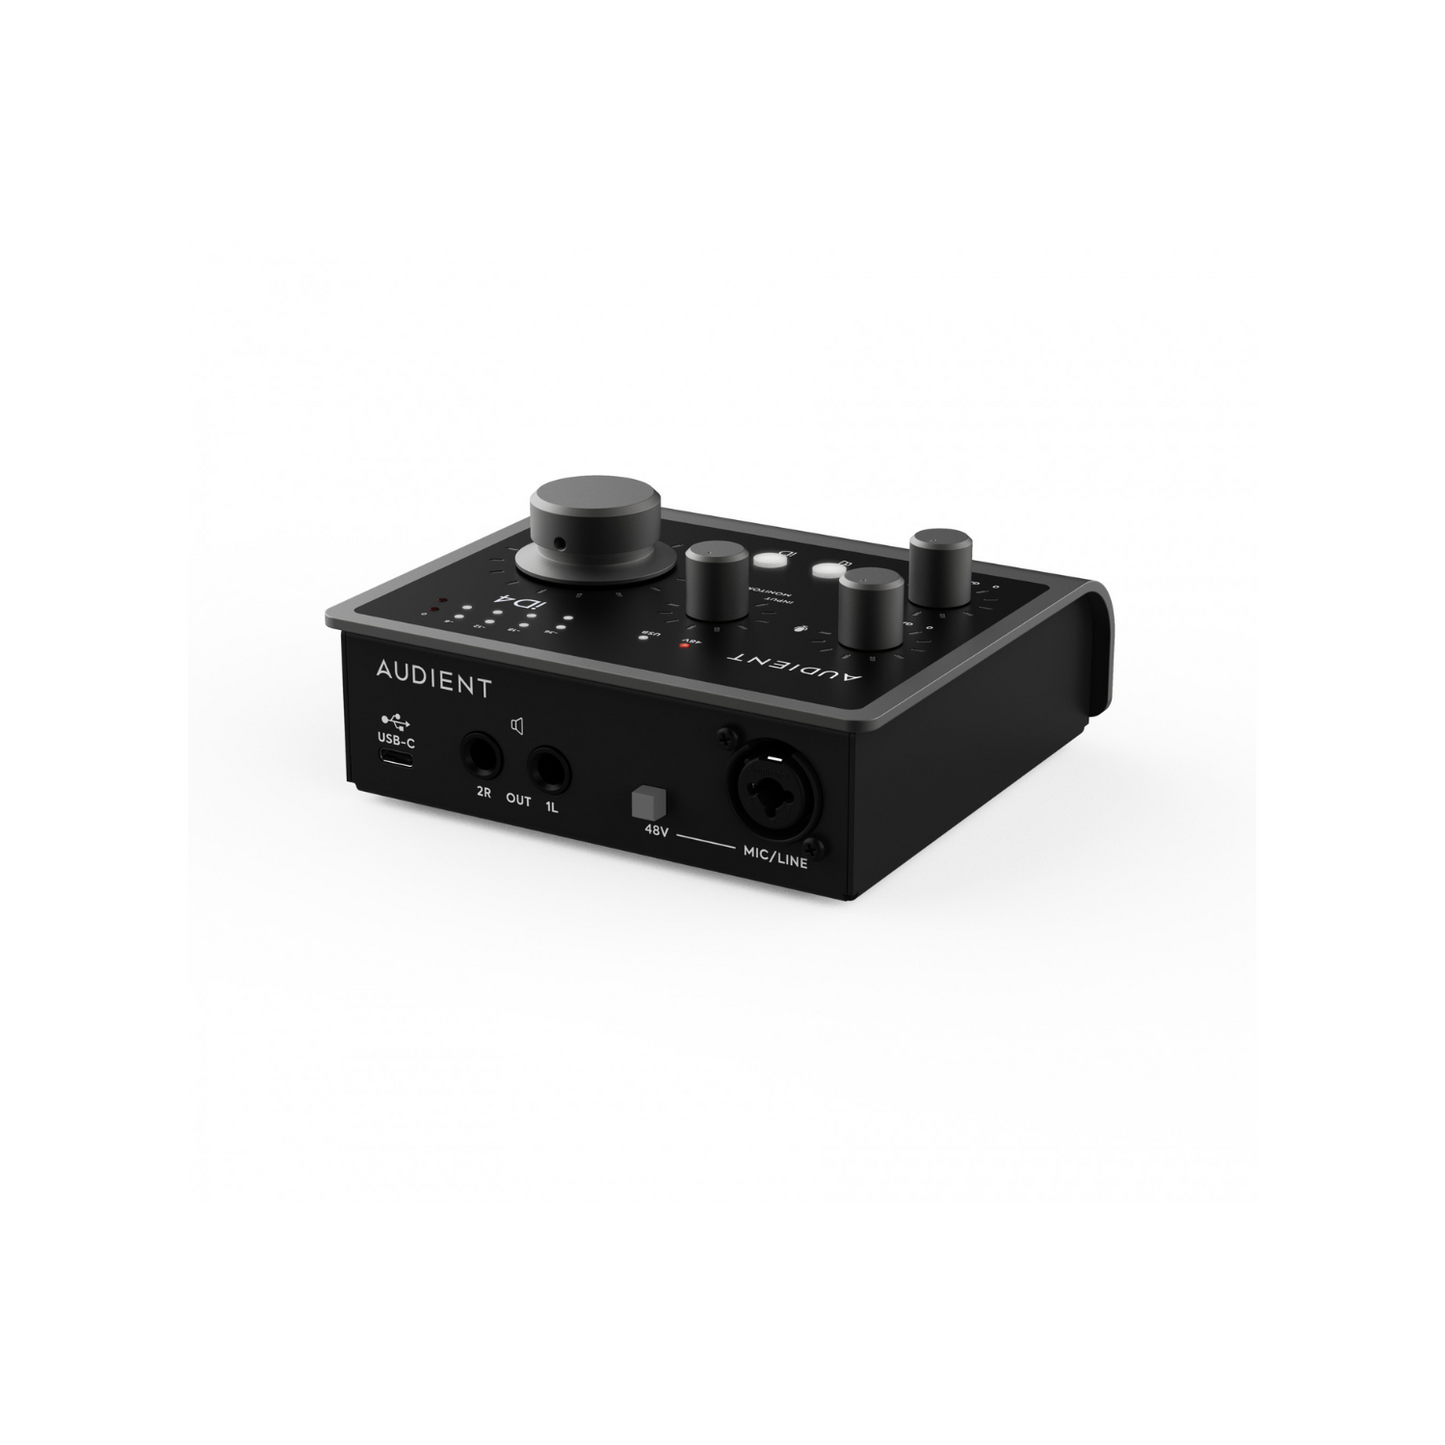 AUDIENT iD4 MkII - 2in/2out Audio Interface